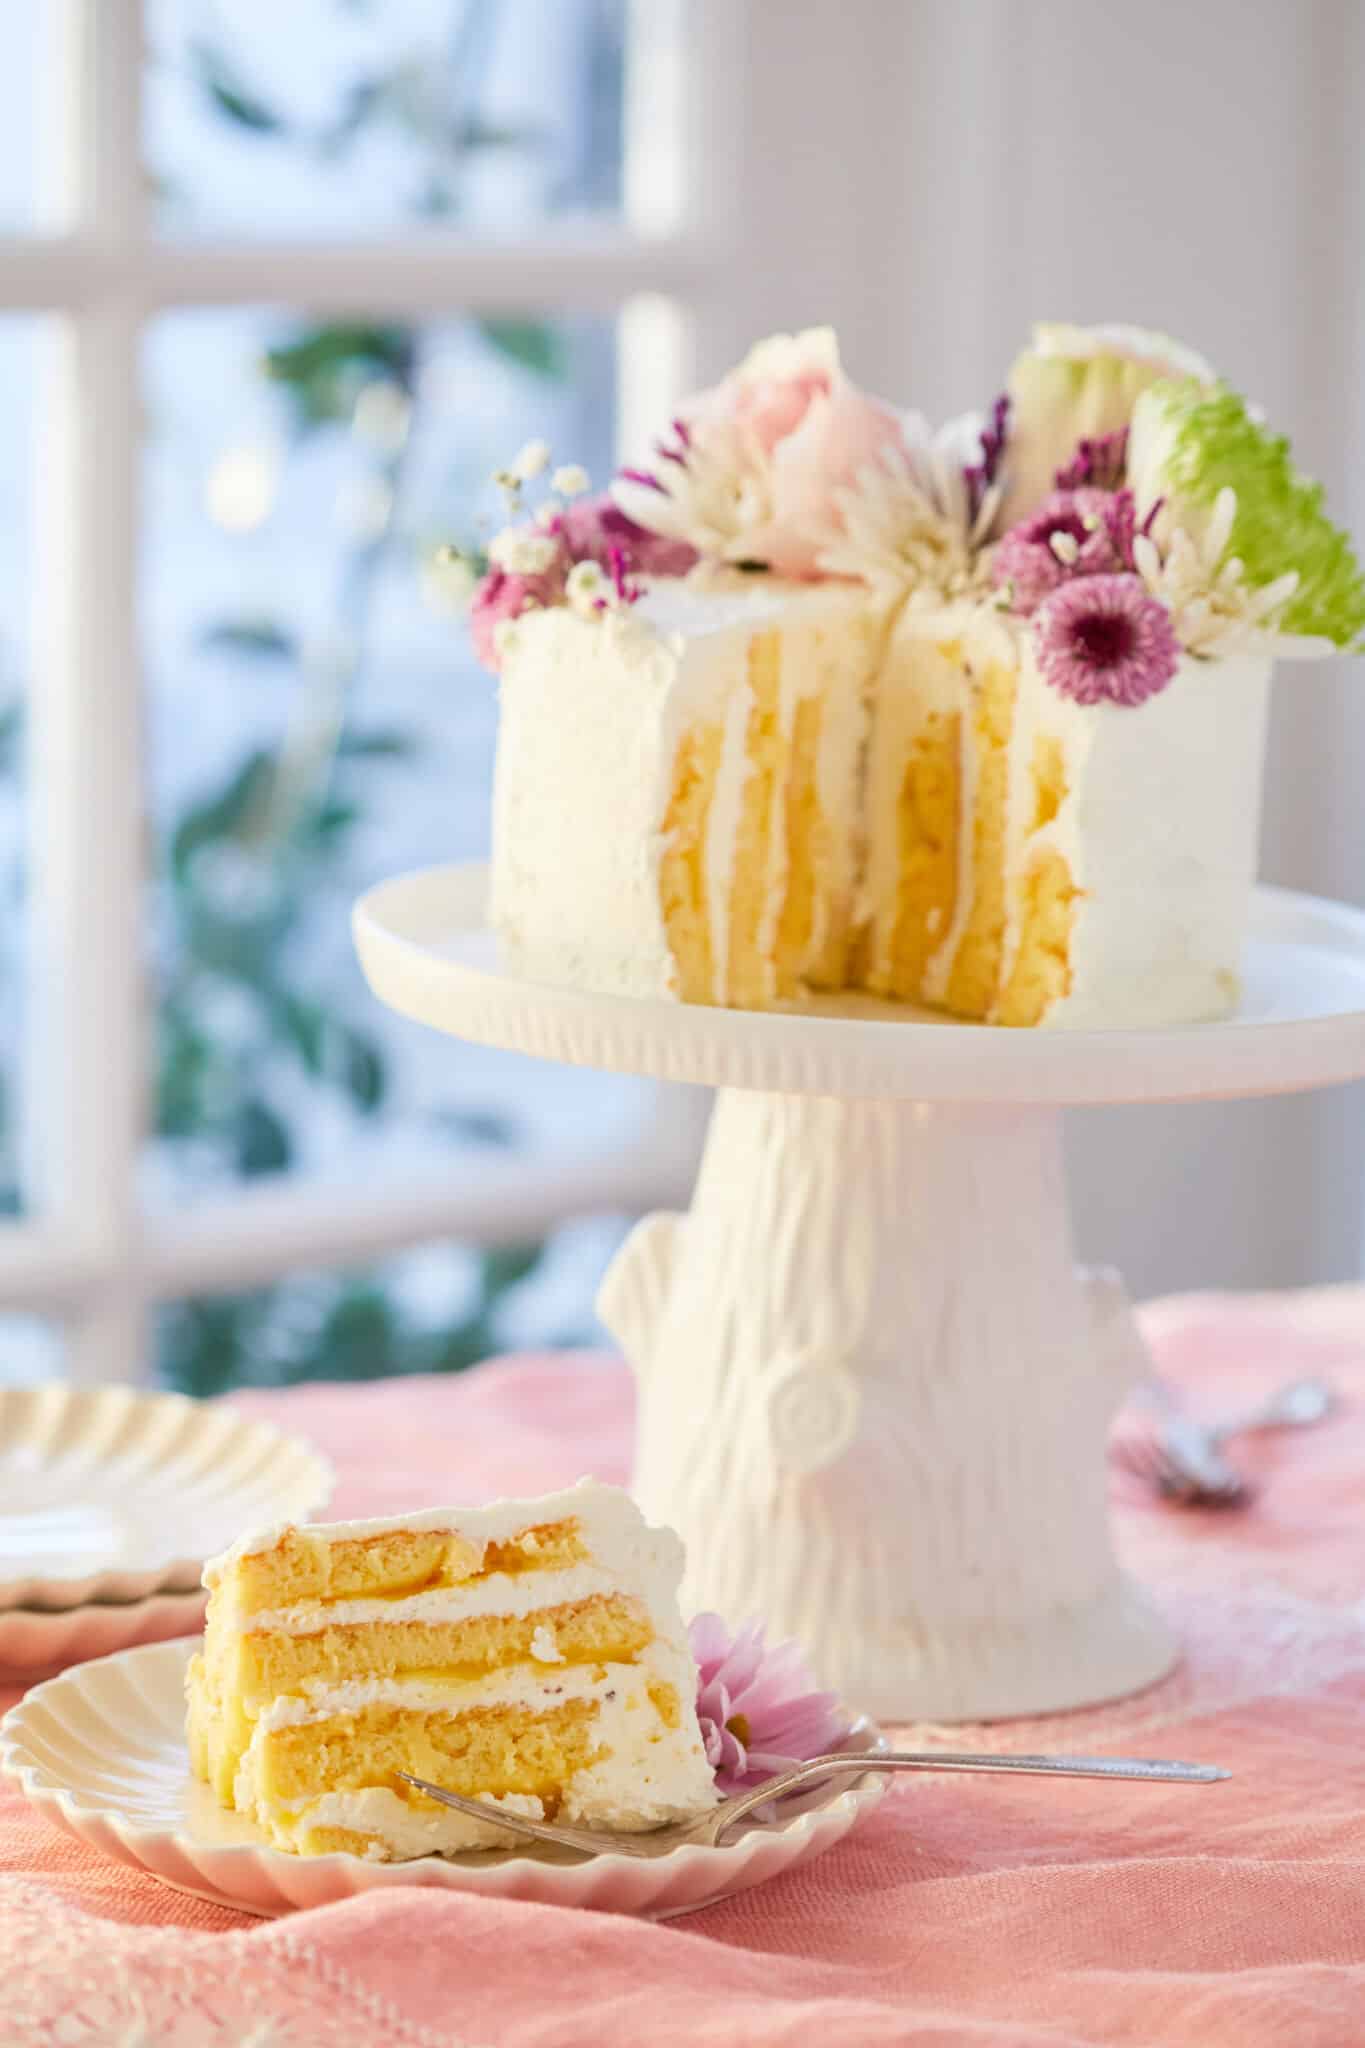 A stunning Vertical Lemon Cake is being displayed on a white tree-stump cake stand, covered with white mascarpone whipped cream and topped with colorful fresh flowers. One slice is cut off and served on a dessert plate. The slice shows the layers of soft cake covered with luscious lemon curd and mascarpone whipped cream on the inside and generously frosted with additional mascarpone whipped cream on the outside. 